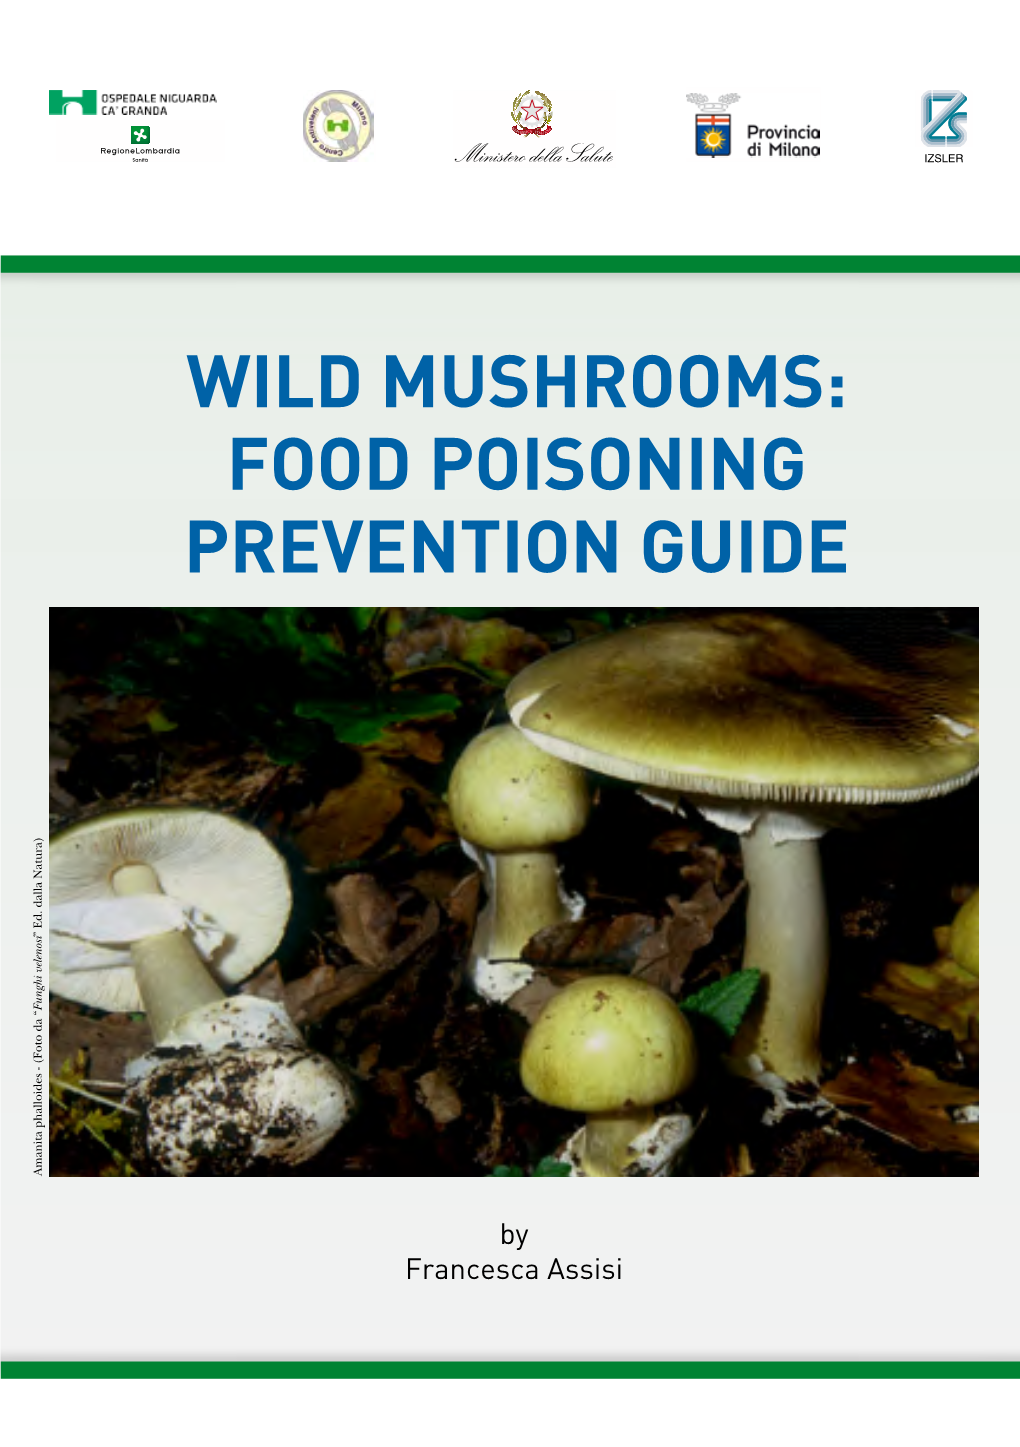 WILD MUSHROOMS: FOOD POISONING PREVENTION GUIDE ” Ed